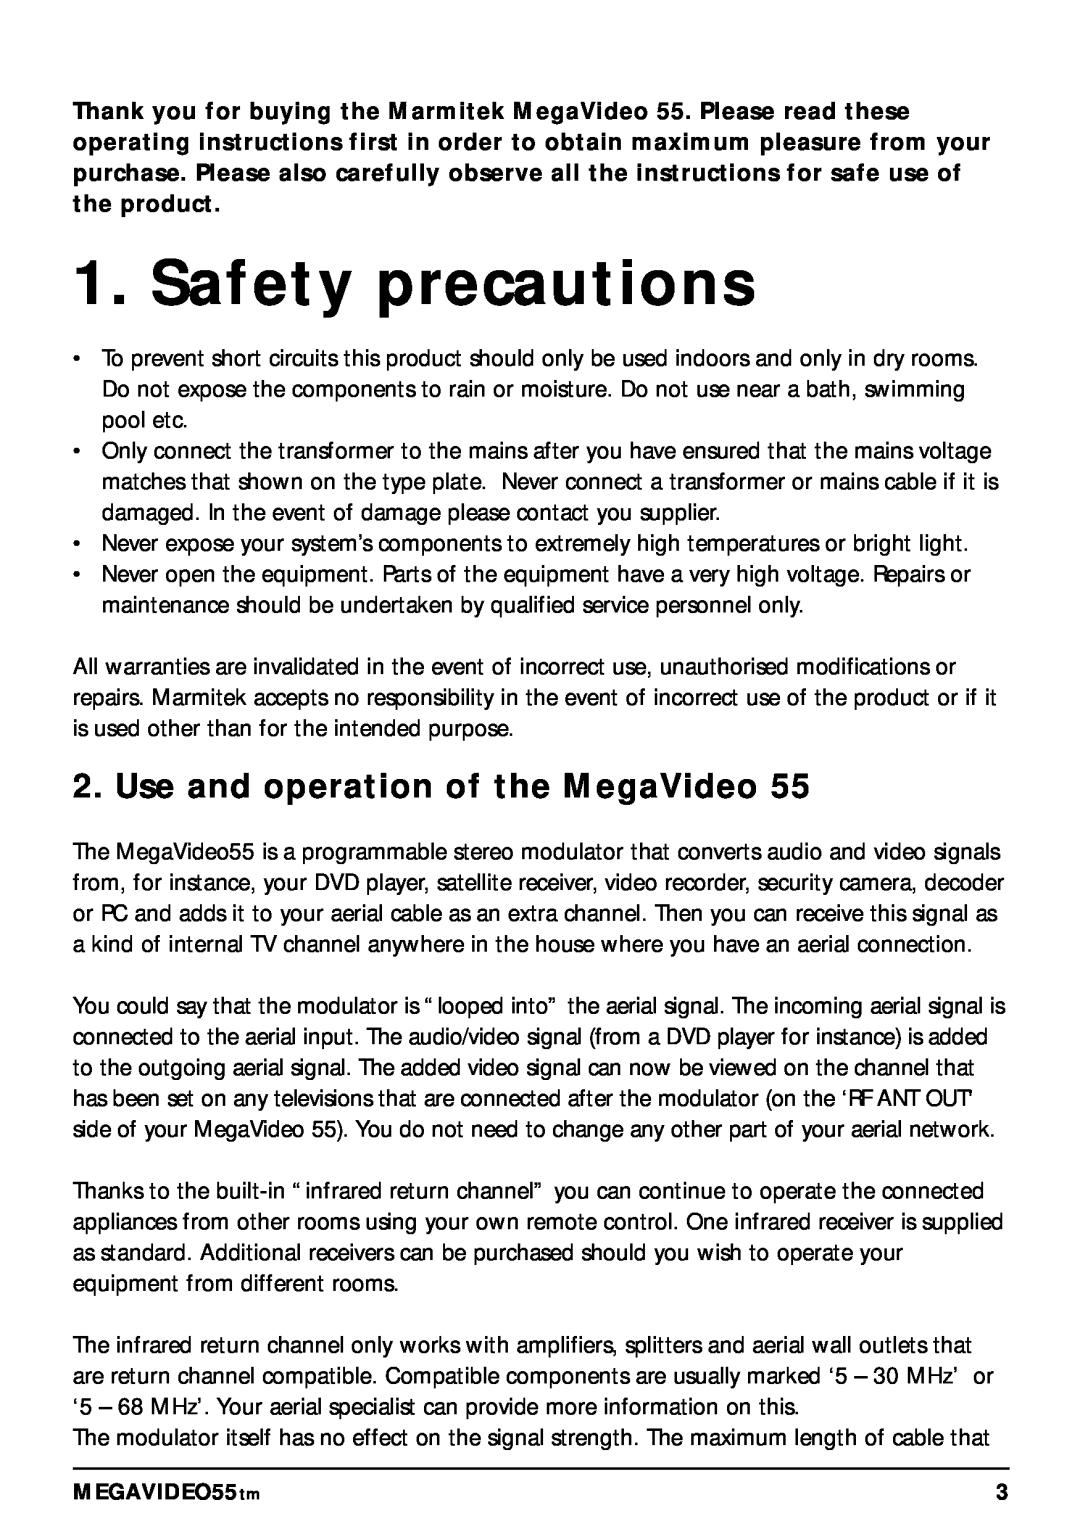 Marmitek 20068 / 300704 operating instructions Safety precautions, Use and operation of the MegaVideo 